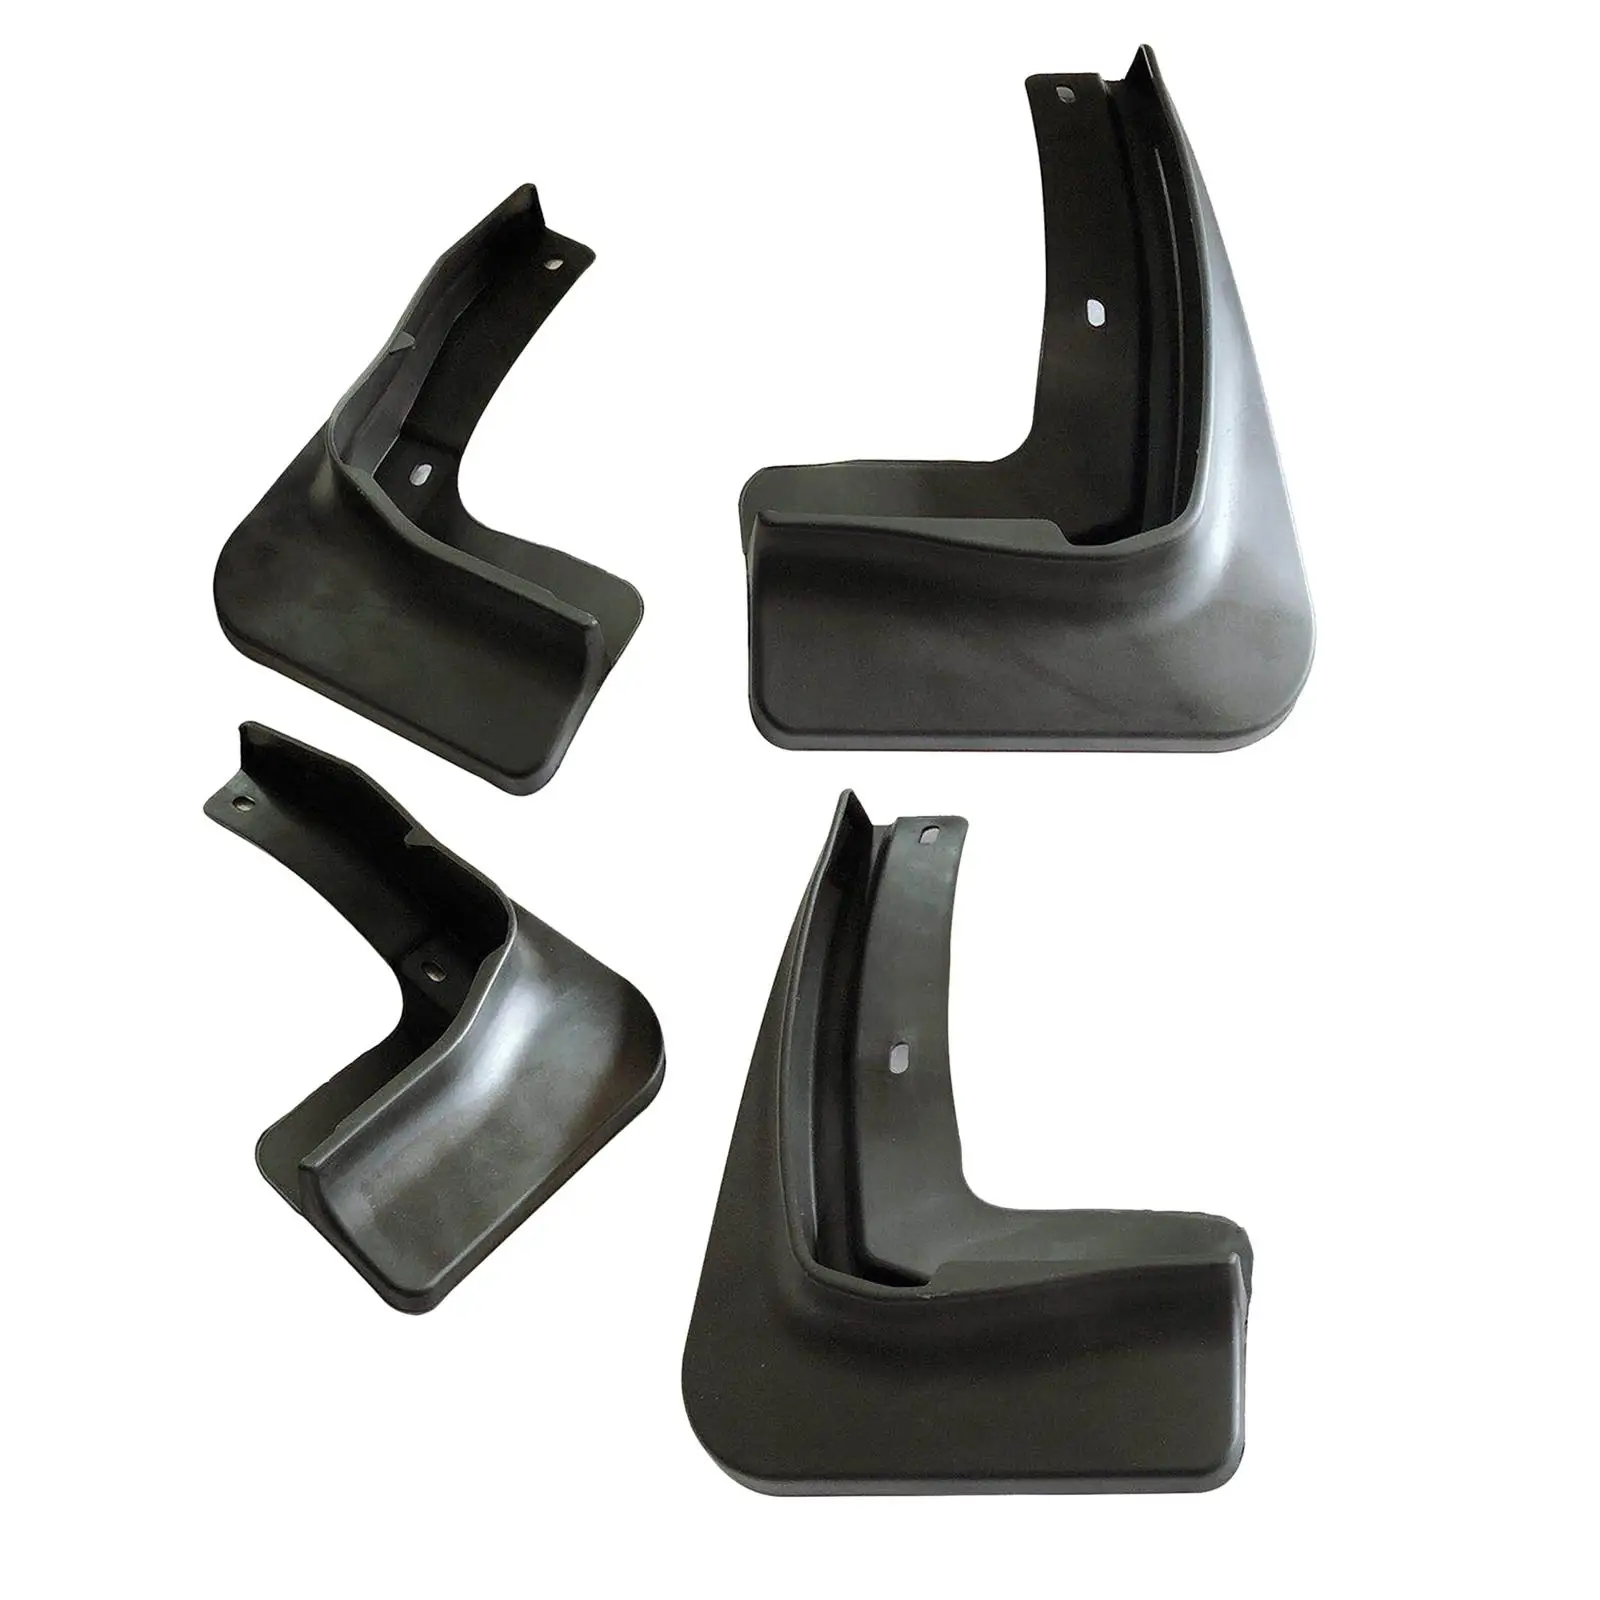 4 Pieces Car Mudguard Muds Guard Flap Accessories for Byd Yuan Plus